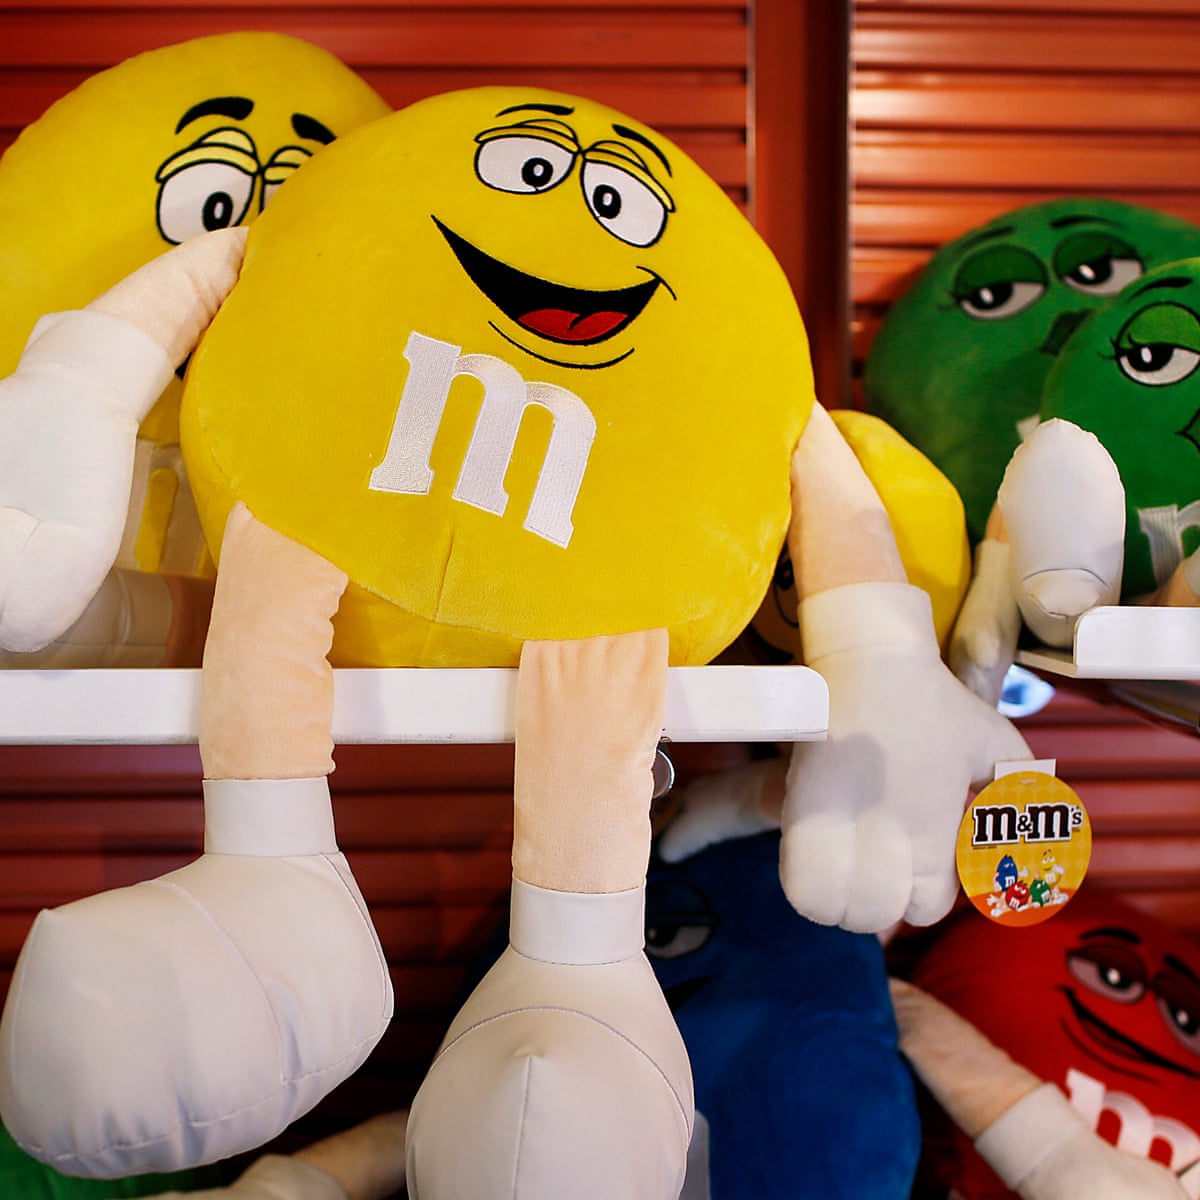 Eye Candy: Gender and Sexuality in M&Ms Advertisements